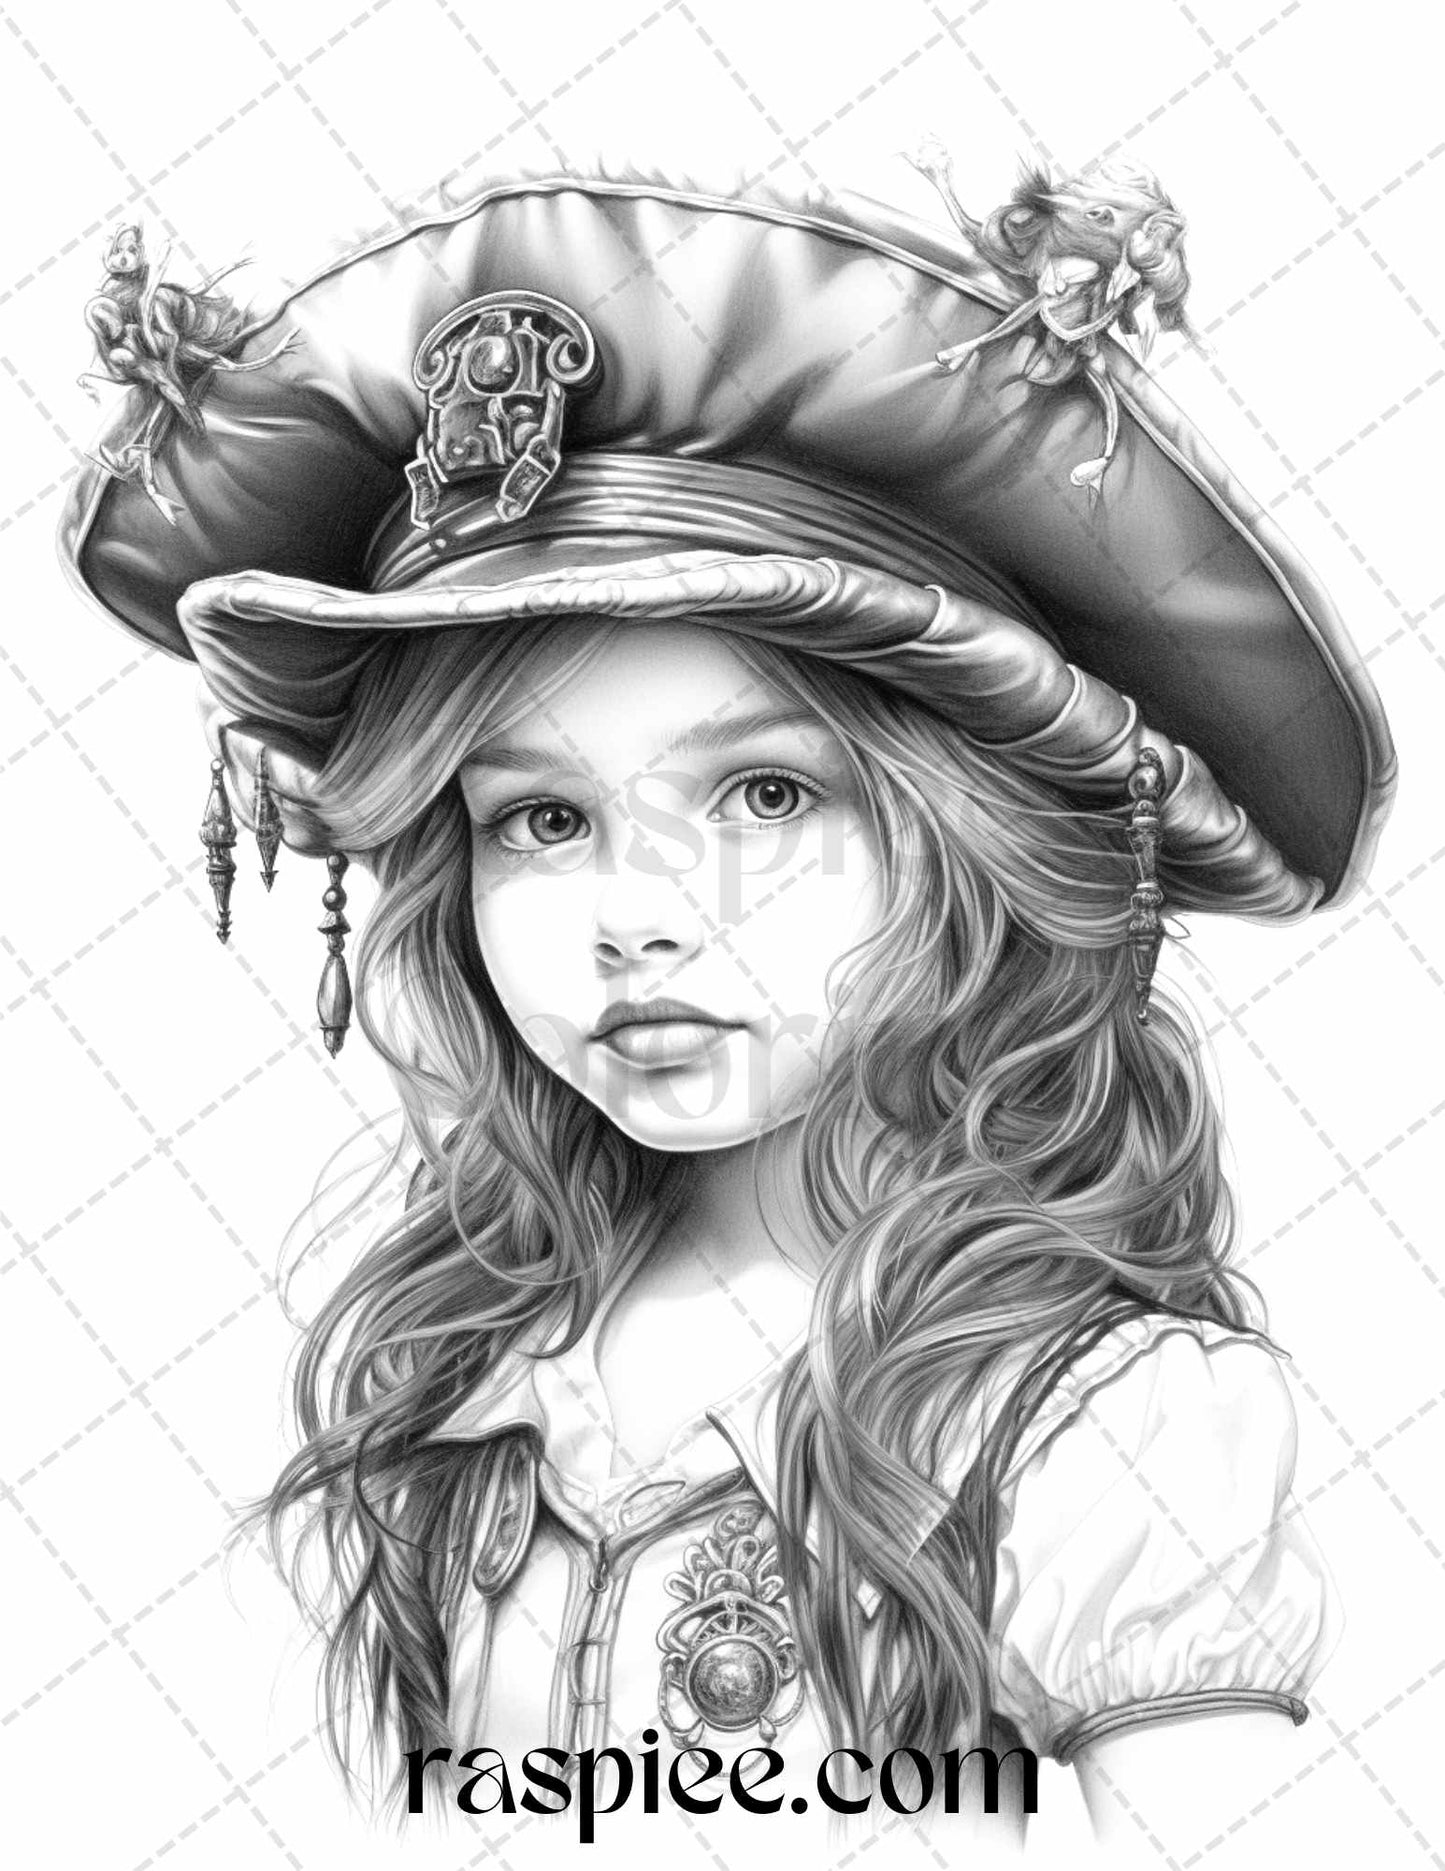 55 Adorable Pirates Grayscale Coloring Pages Printable for Adults, PDF File Instant Download - raspiee